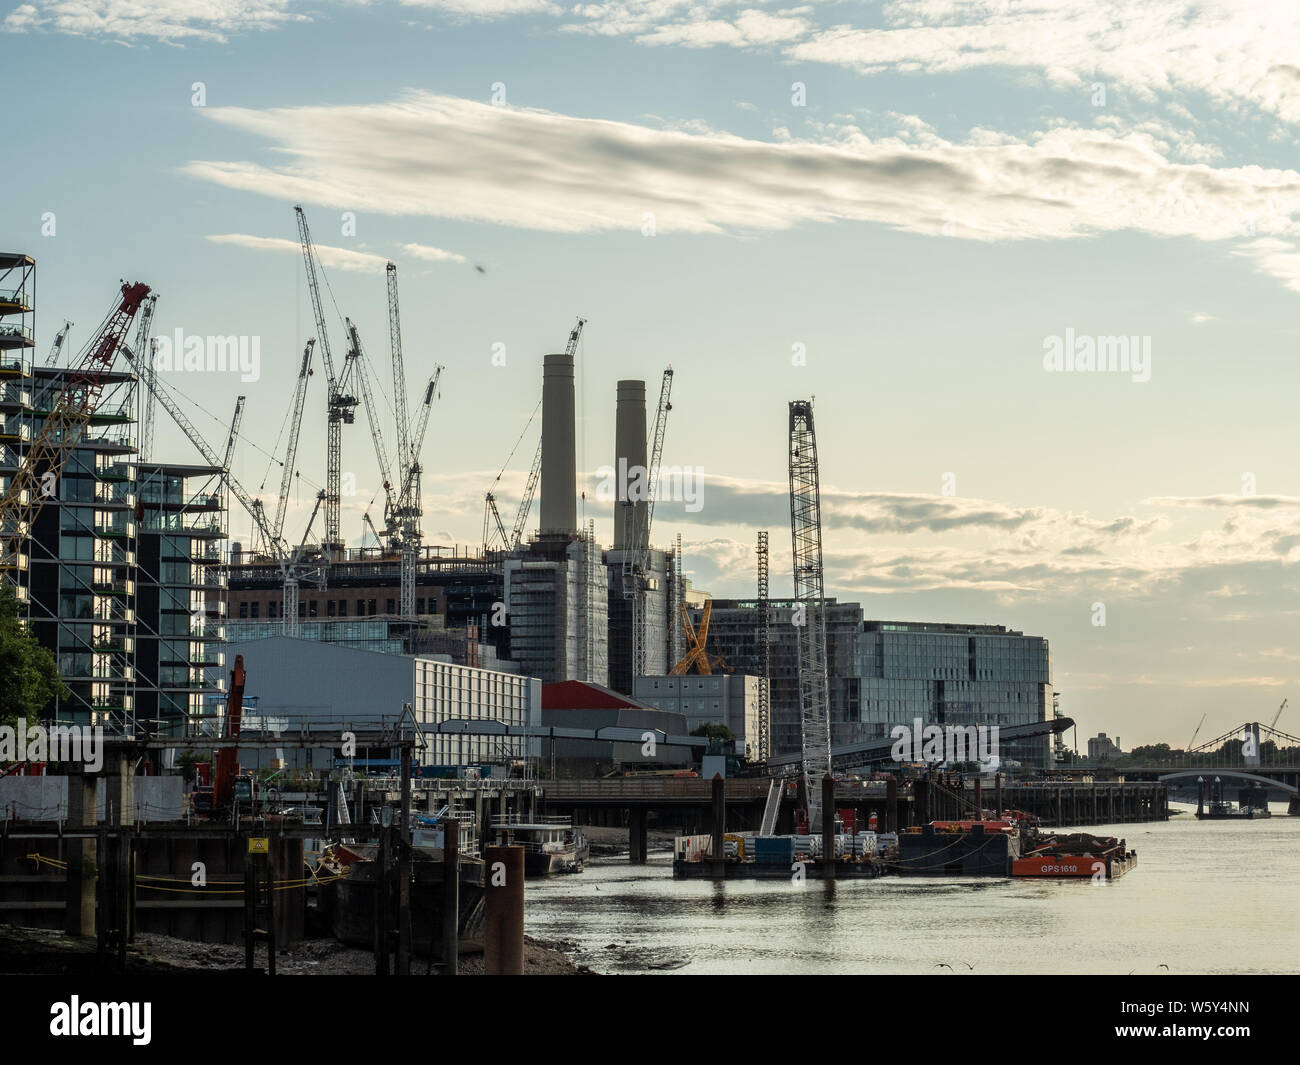 The decommissioned Battersea Power Station on the south bank of the River Thames, Battersea, London. Stock Photo